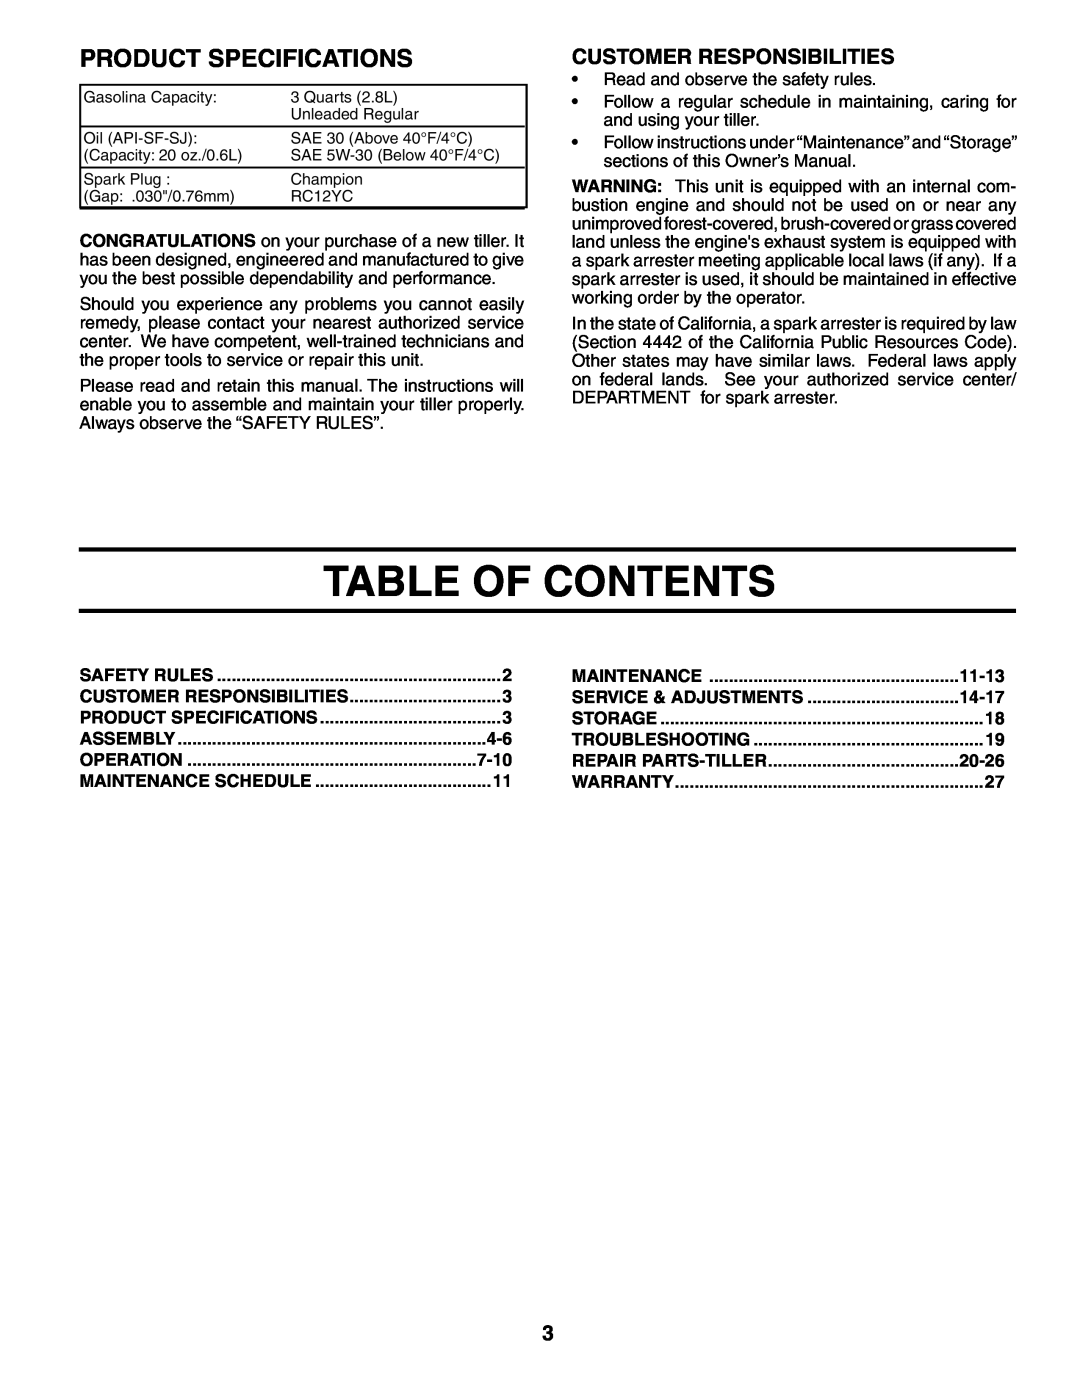 Poulan 184865 owner manual Table Of Contents, Product Specifications, Customer Responsibilities 